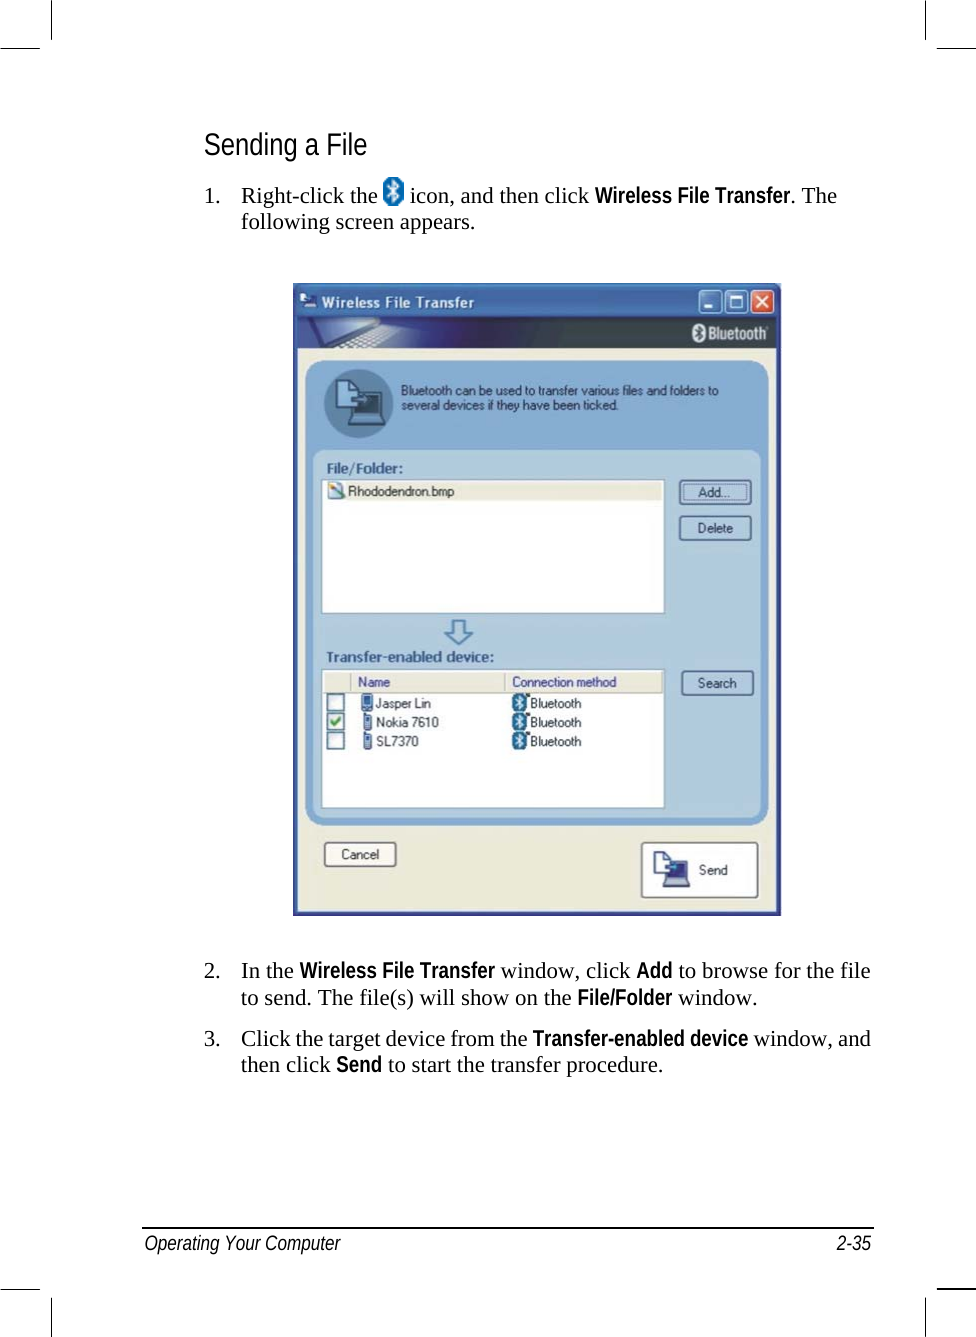  Sending a File 1. Right-click the   icon, and then click Wireless File Transfer. The following screen appears.  2. In the Wireless File Transfer window, click Add to browse for the file to send. The file(s) will show on the File/Folder window. 3.  Click the target device from the Transfer-enabled device window, and then click Send to start the transfer procedure. Operating Your Computer  2-35 